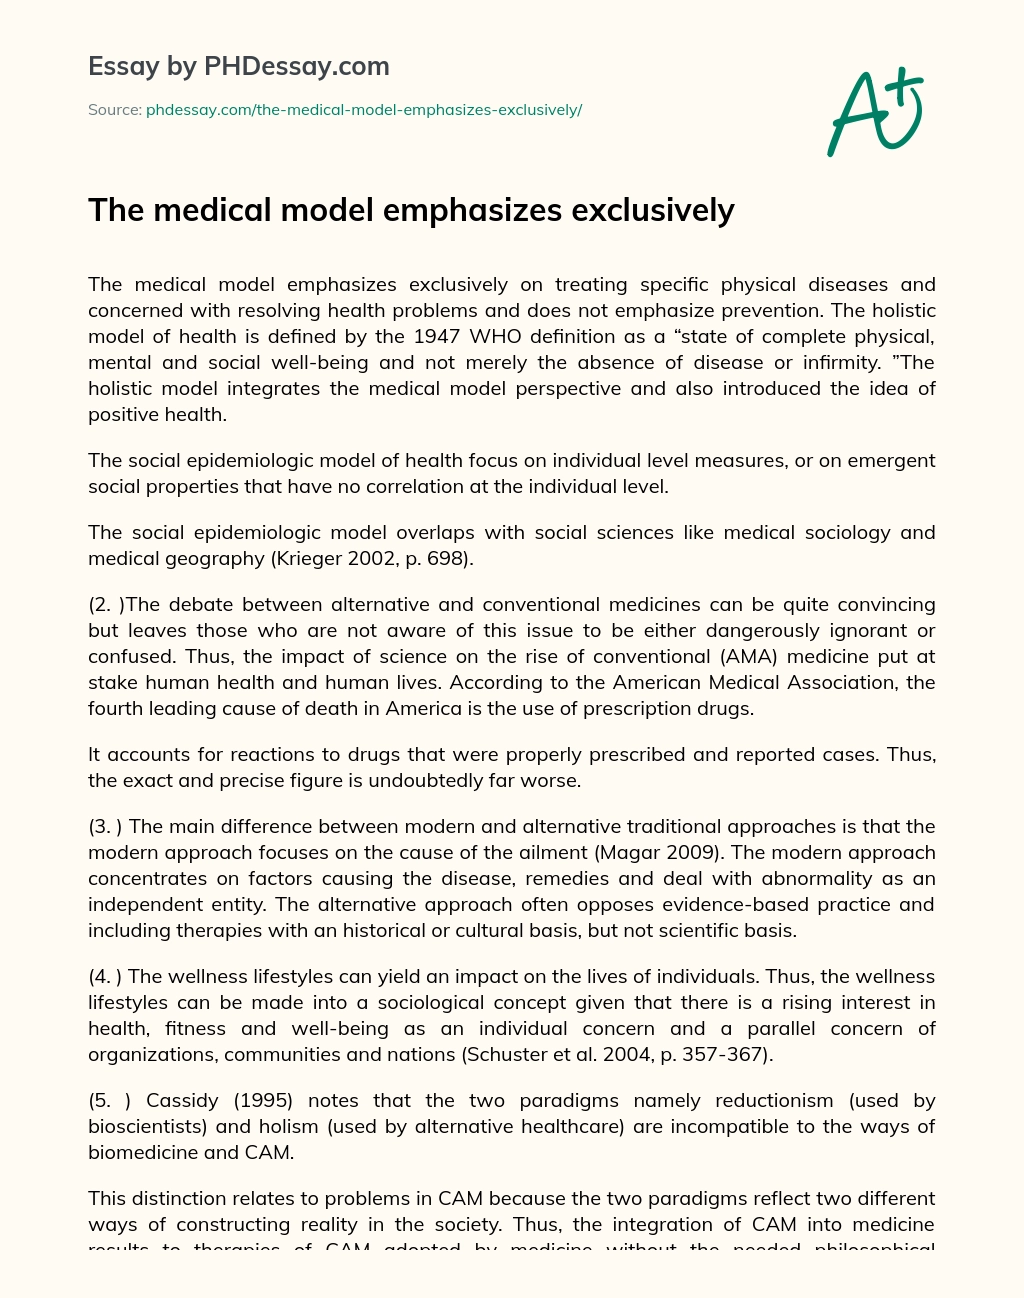 The medical model emphasizes exclusively essay